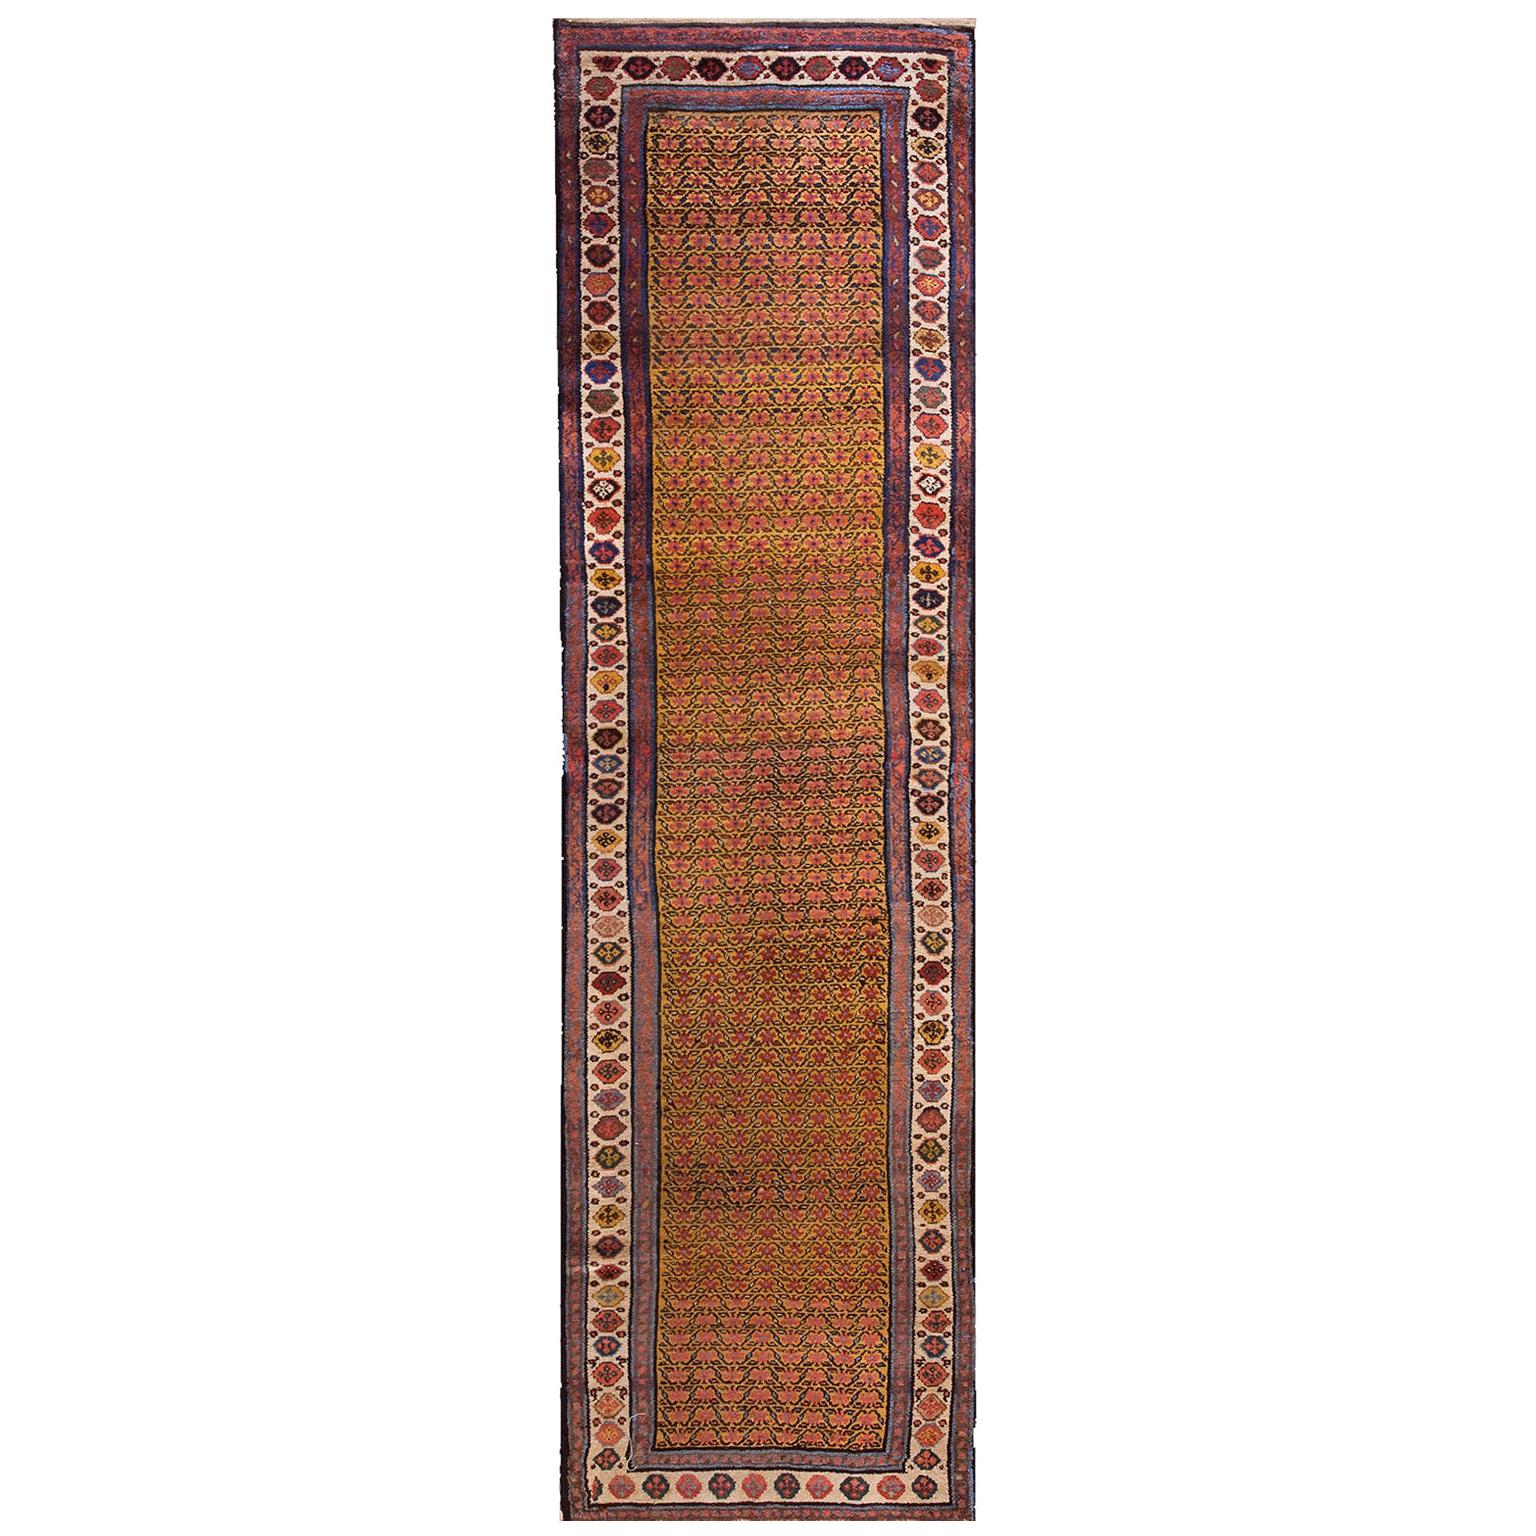 Late 19th Century N.W. Persian Carpet ( 3' x 11'7" - 91 x 353 ) For Sale